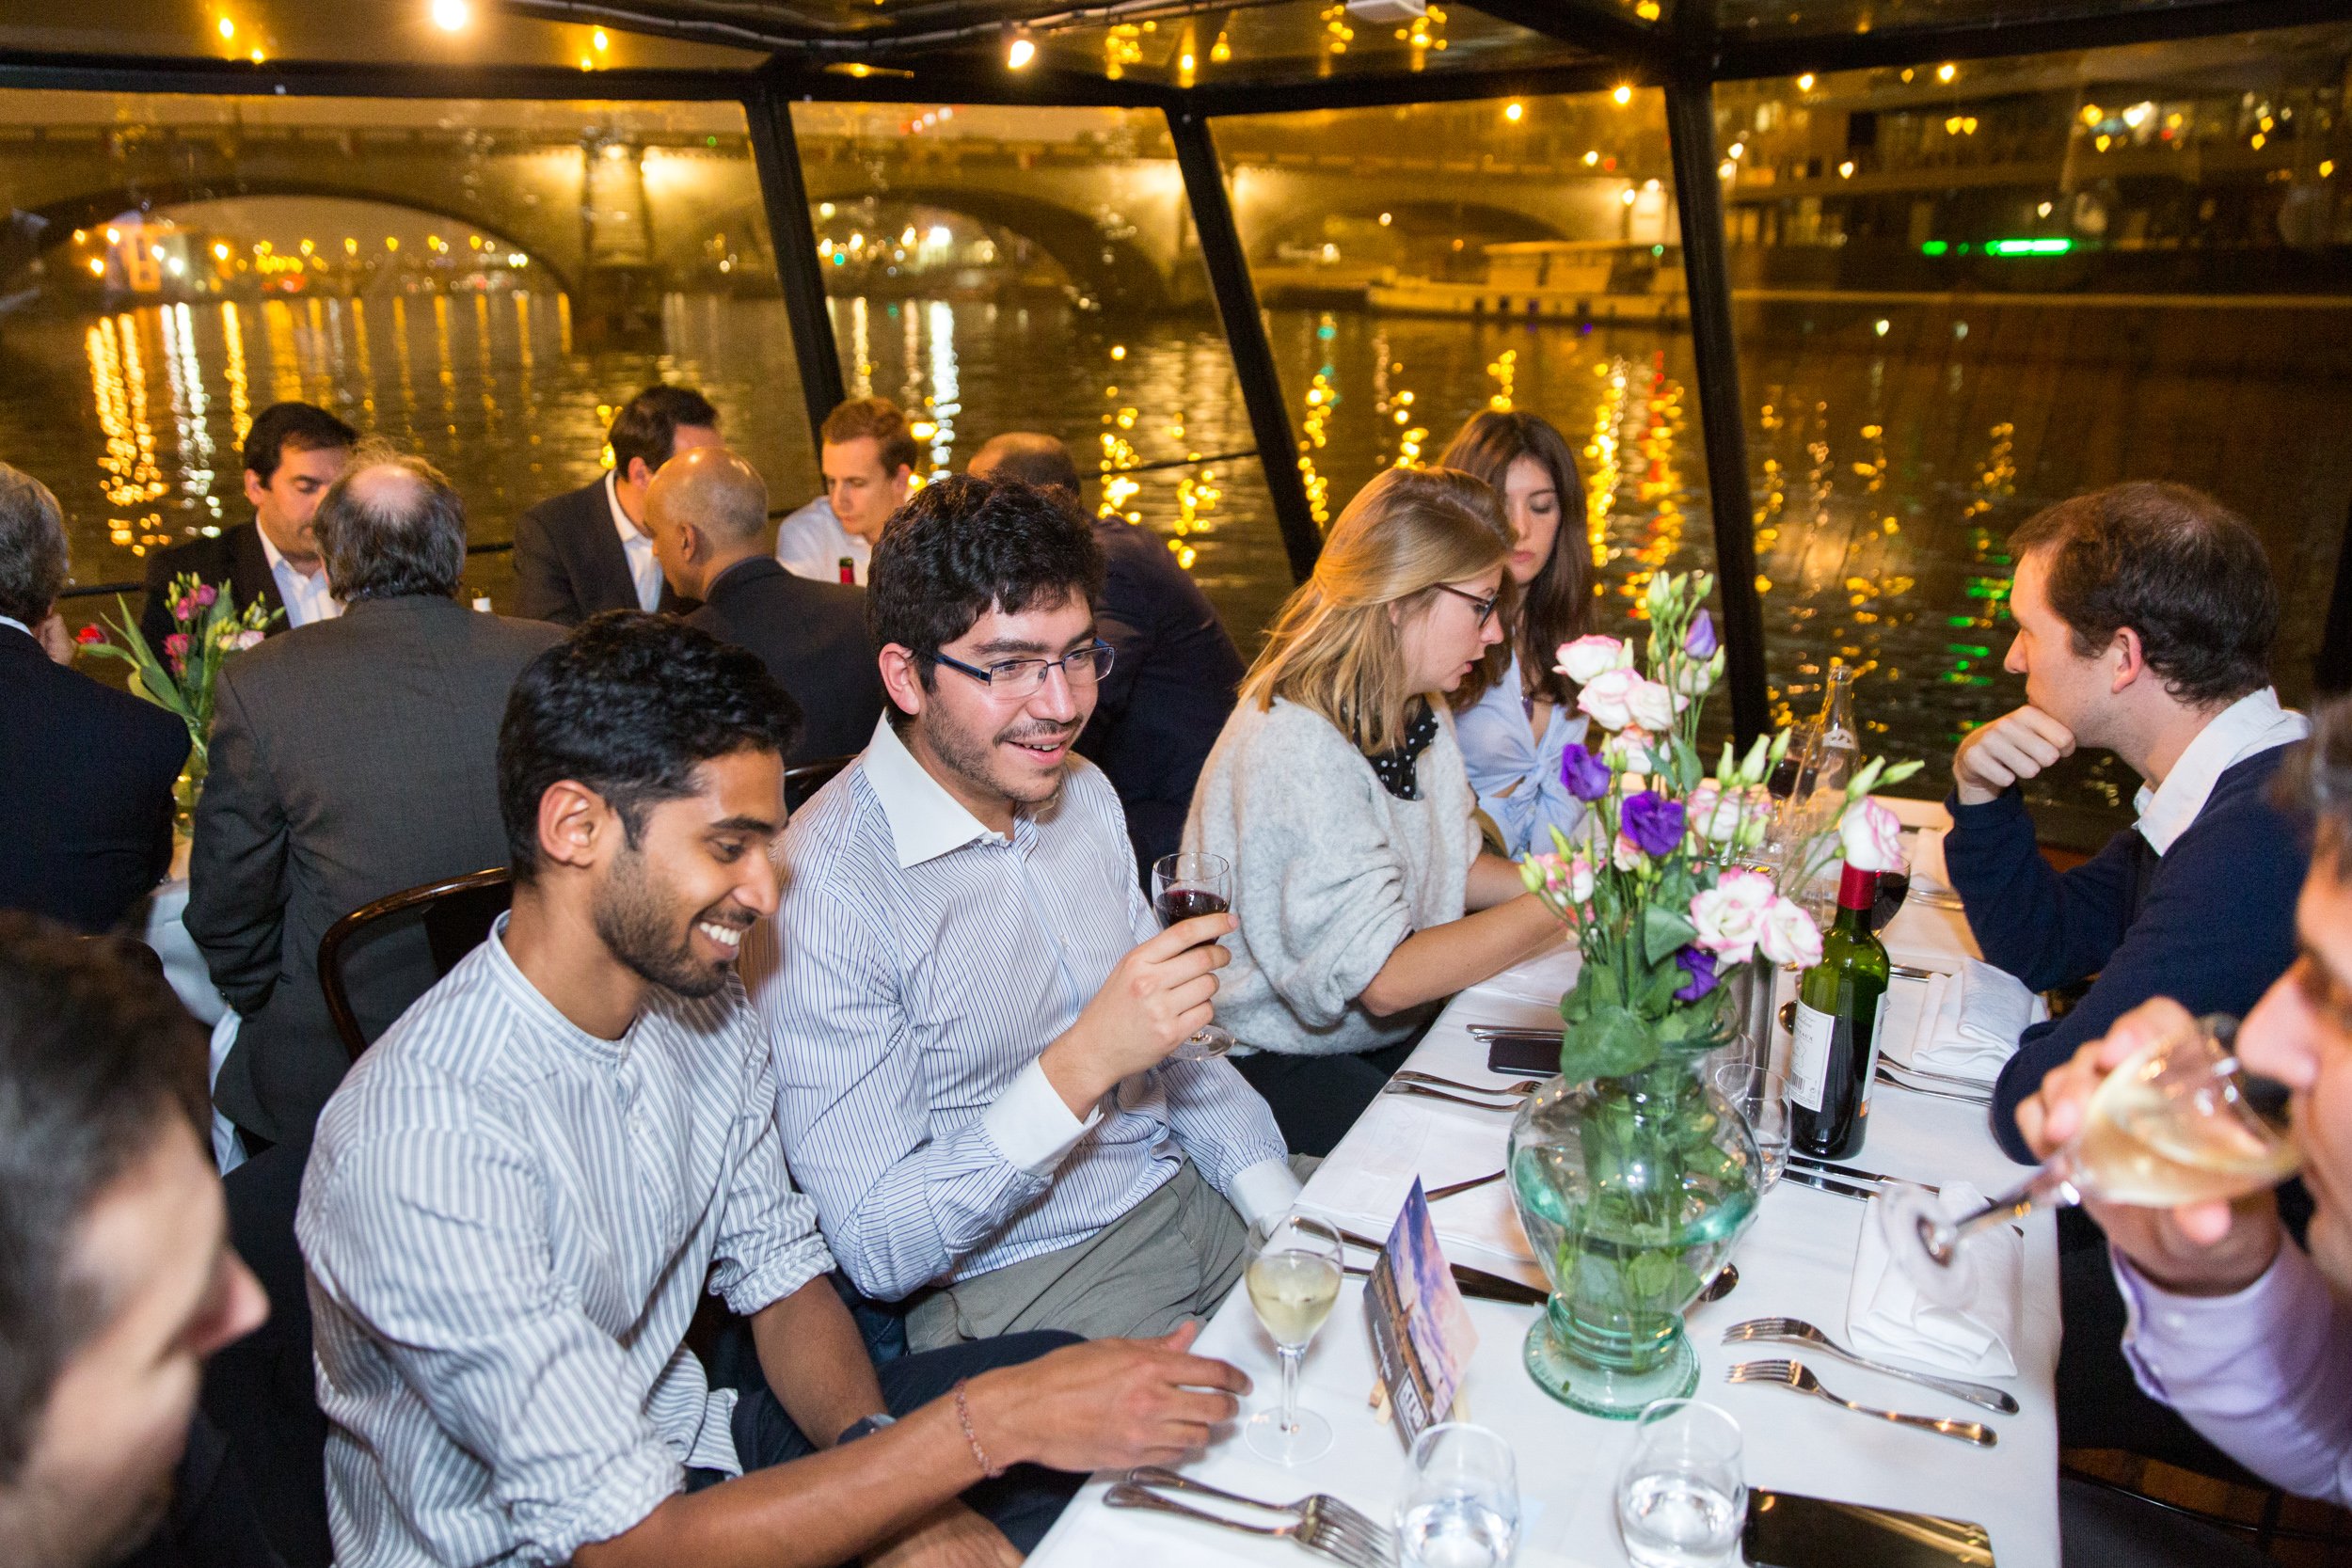  gala-dinner-guests-enjoy-tour-of-the-seine 